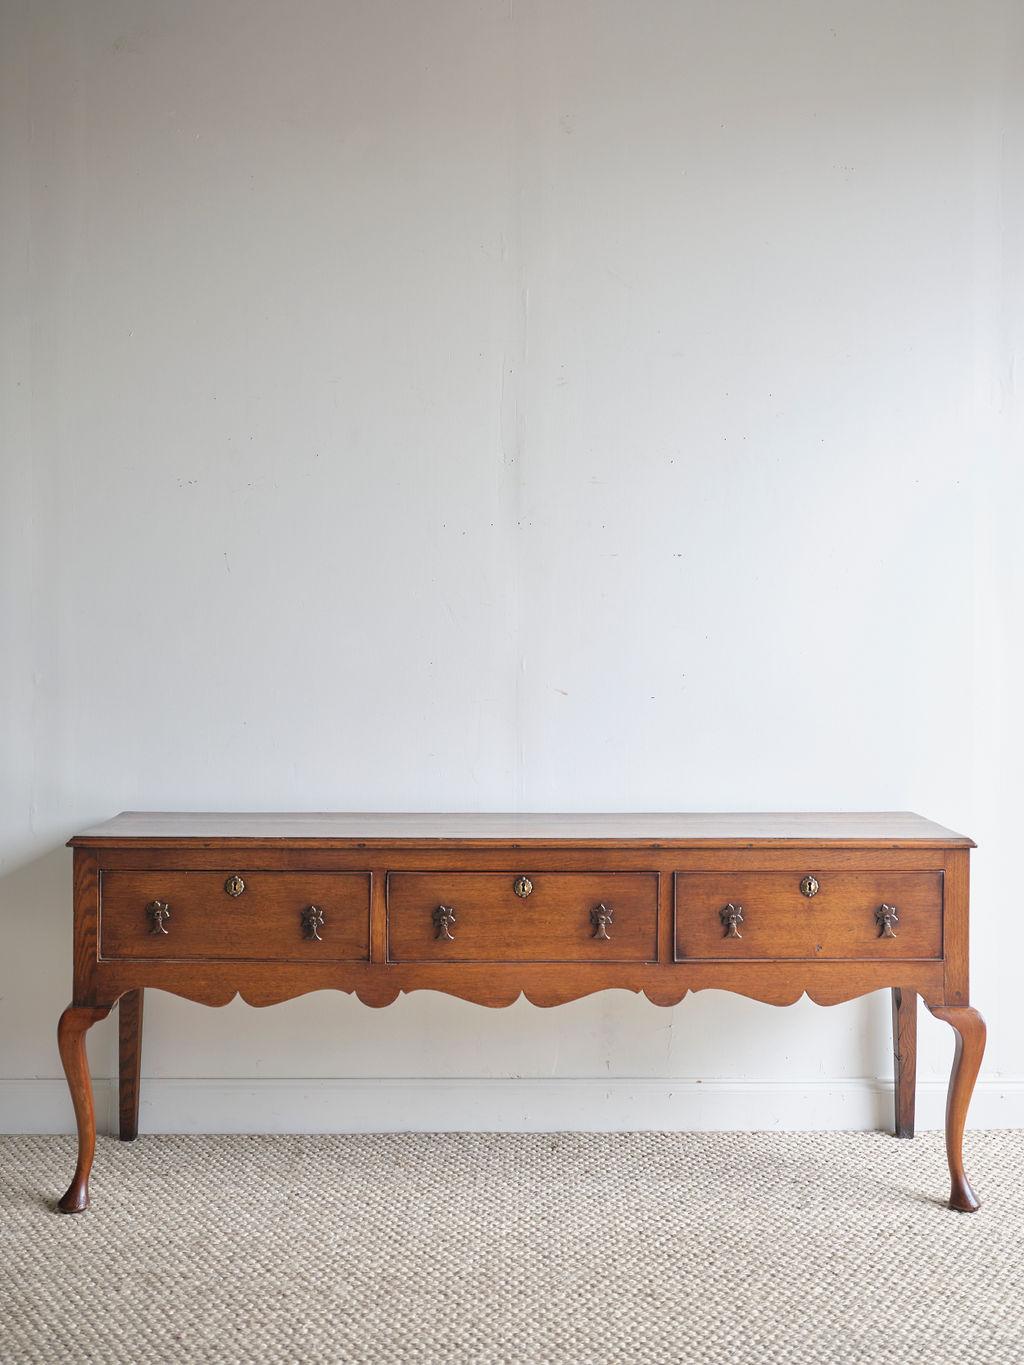 A lovely Georgian oak dresser that would make a unique, yet classic addition to any home or office. It features 3 medium sized drawers and a dark and warm patina. The brass hardware is in great condition. Each drawer has a key hole, but this dresser